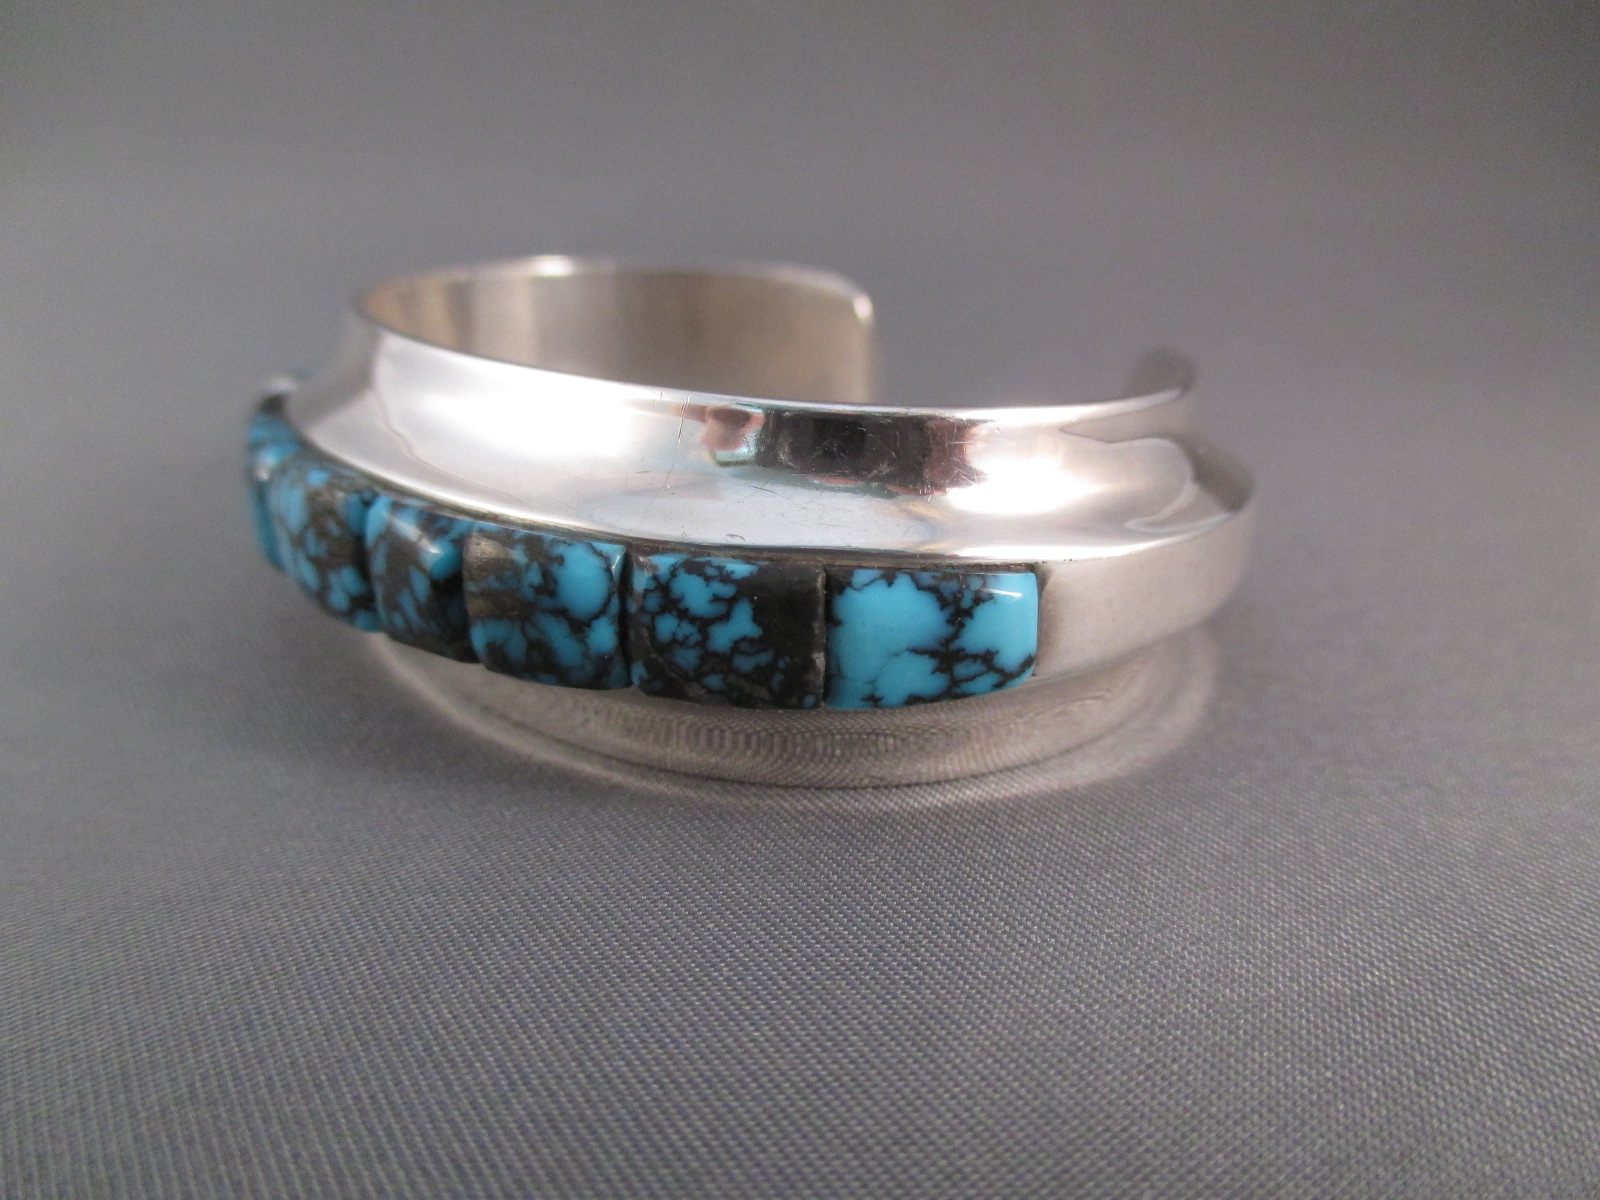 Bracelet With Turquoise Inlay By Navajo Jewelry Artist Larry Begay